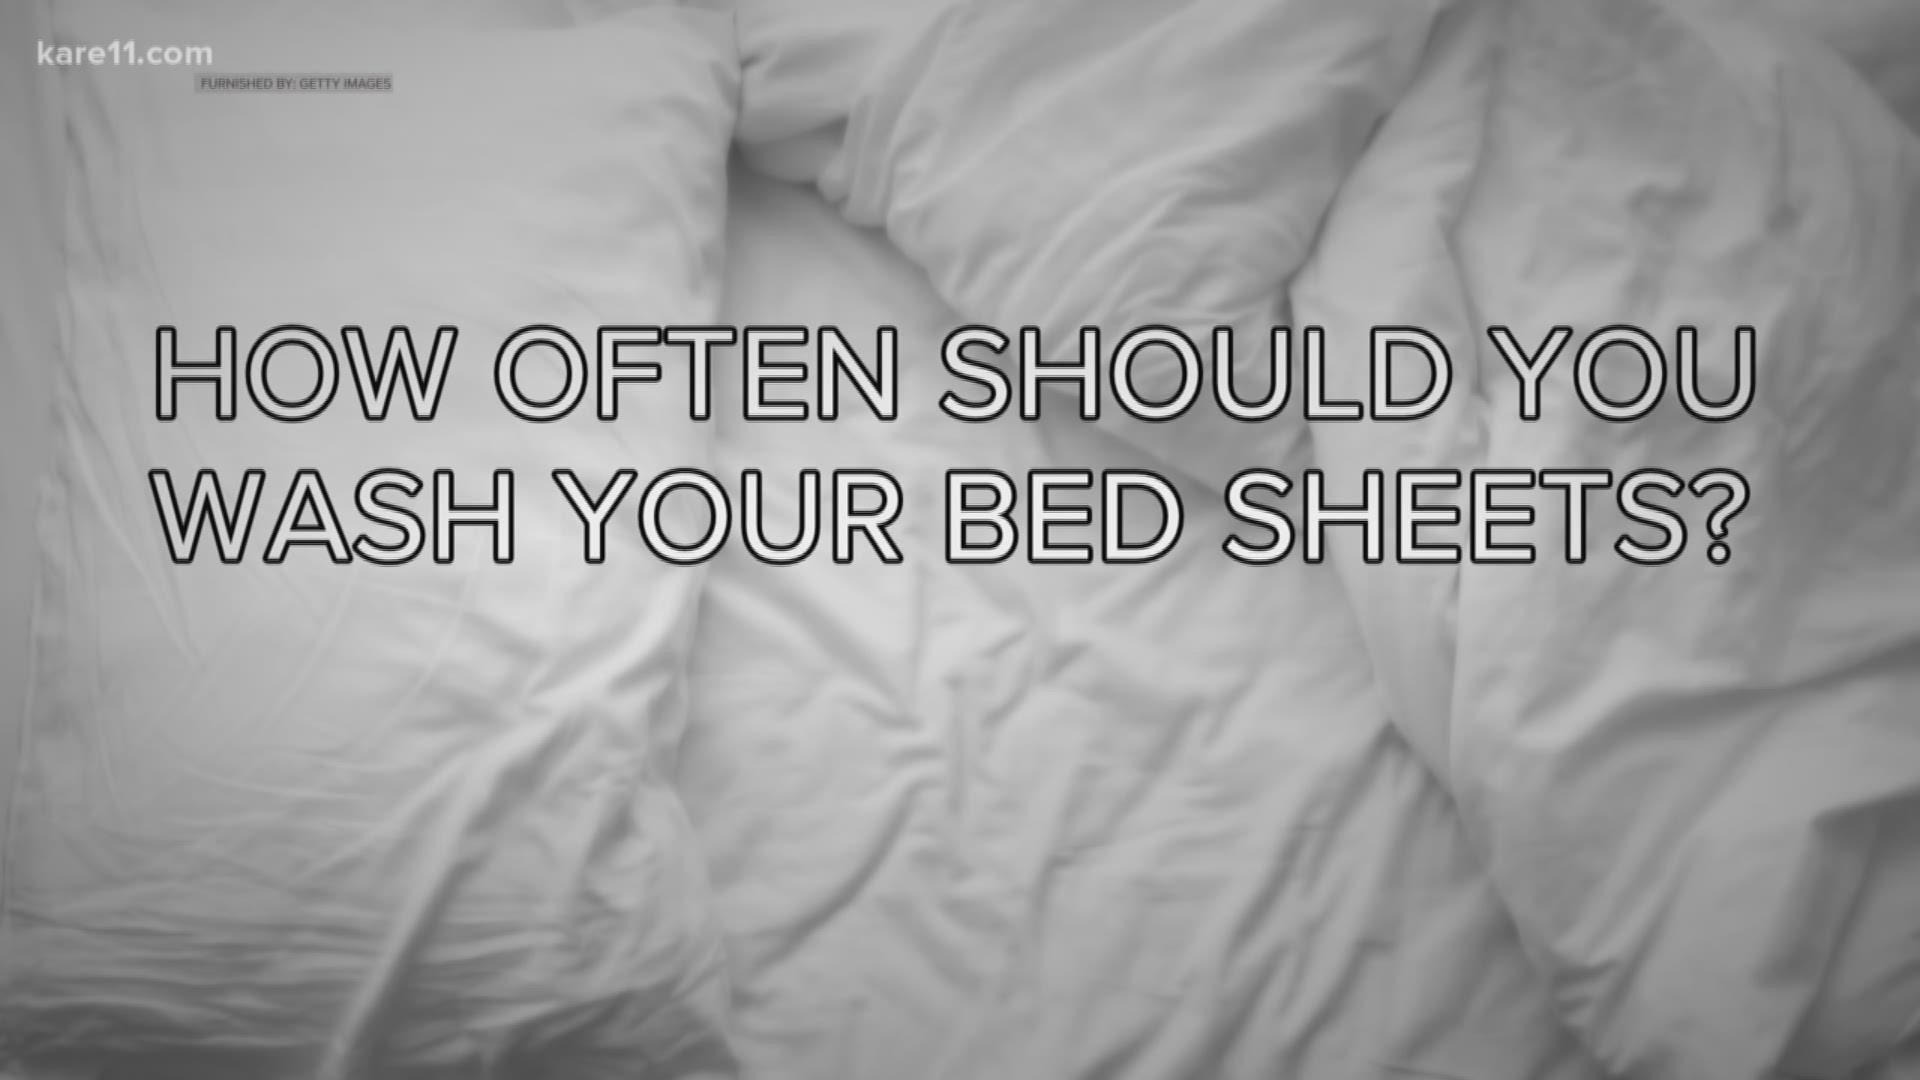 Verify: How often should you wash your sheets?